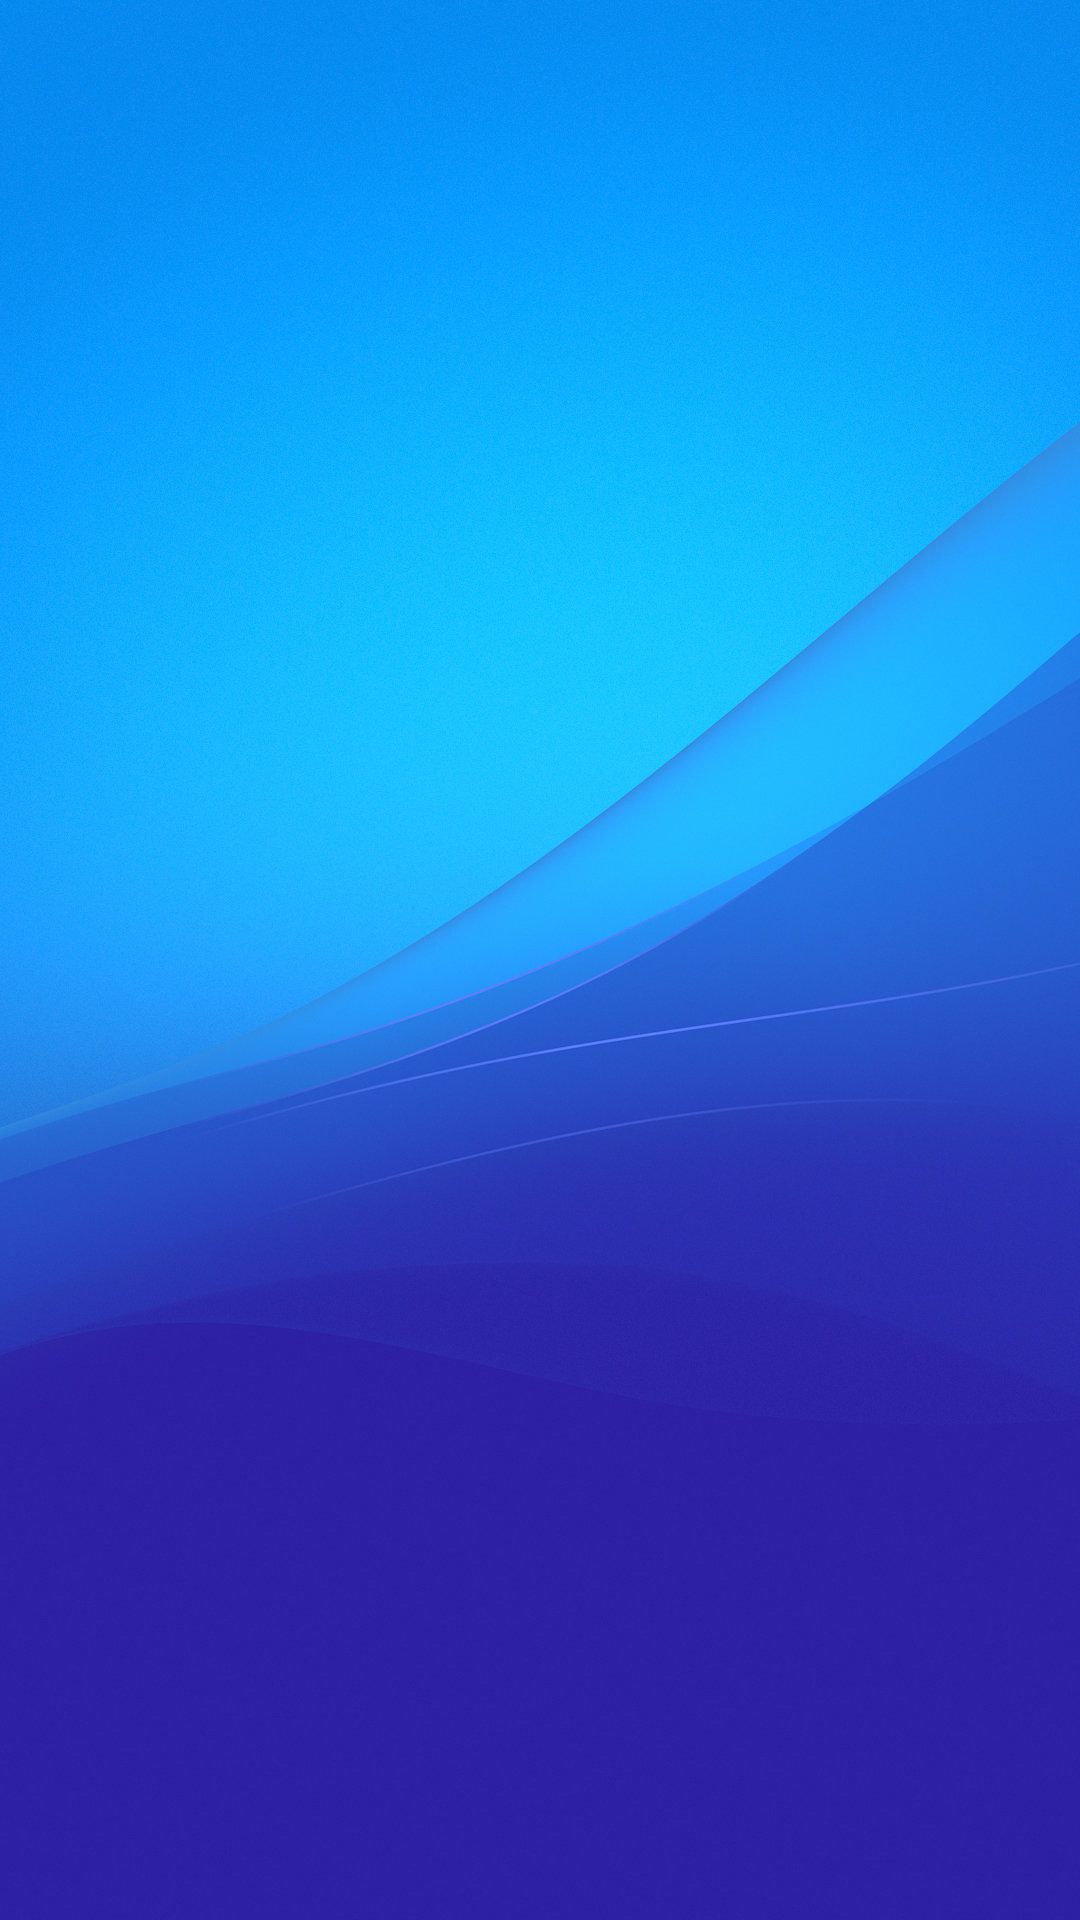 Official Sony Xperia Z4 Wallpaper Now Available for All. Xperia